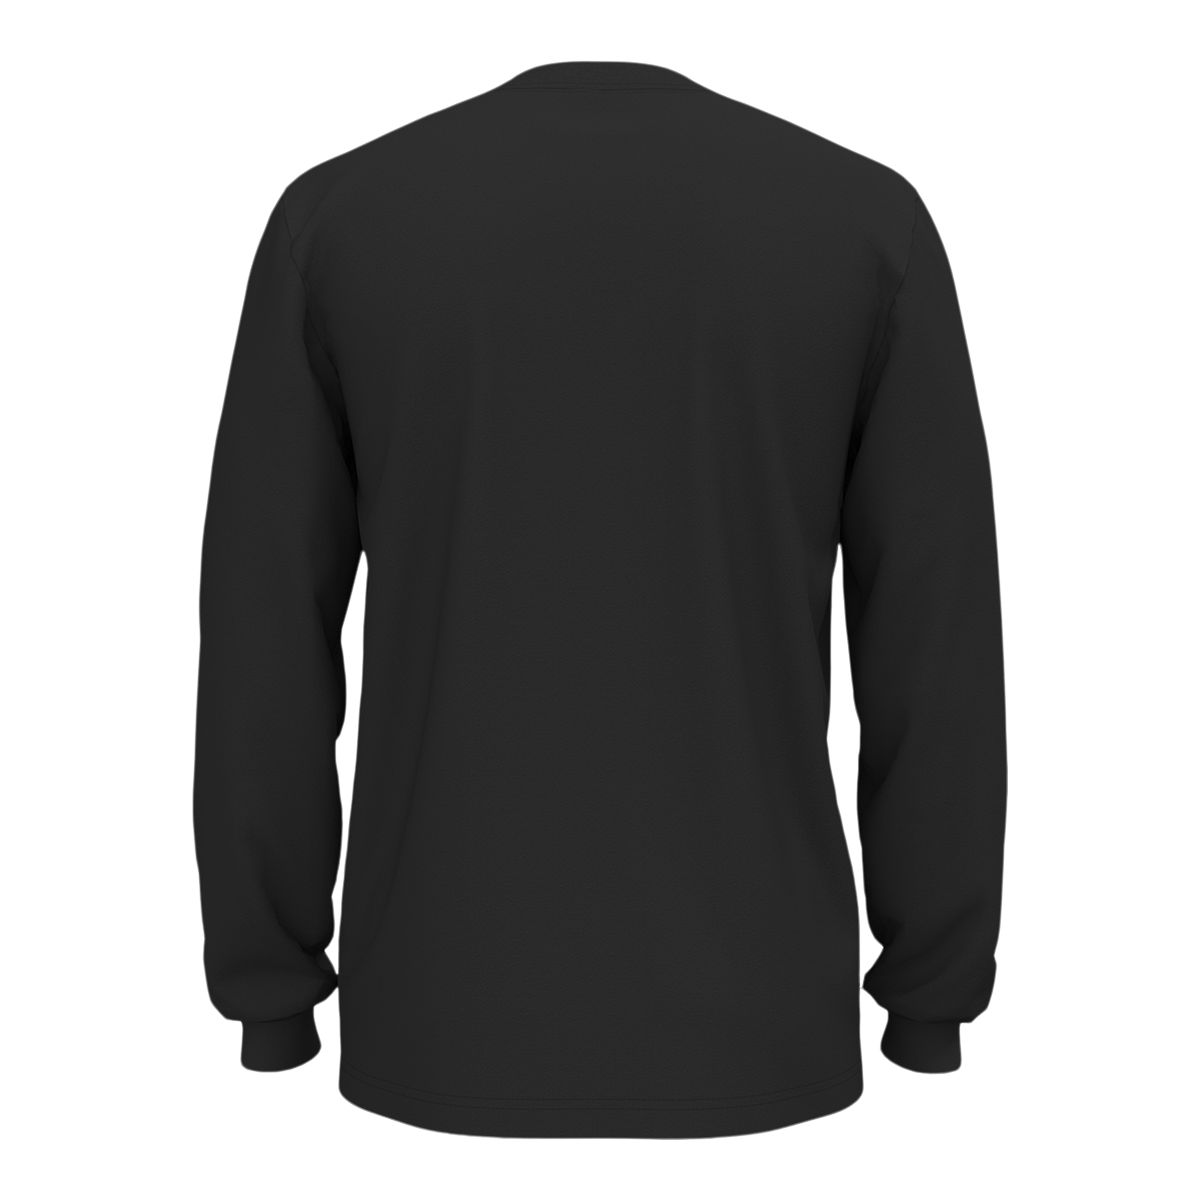 THE NORTH FACE Men's Elevation Long Sleeve Shirt